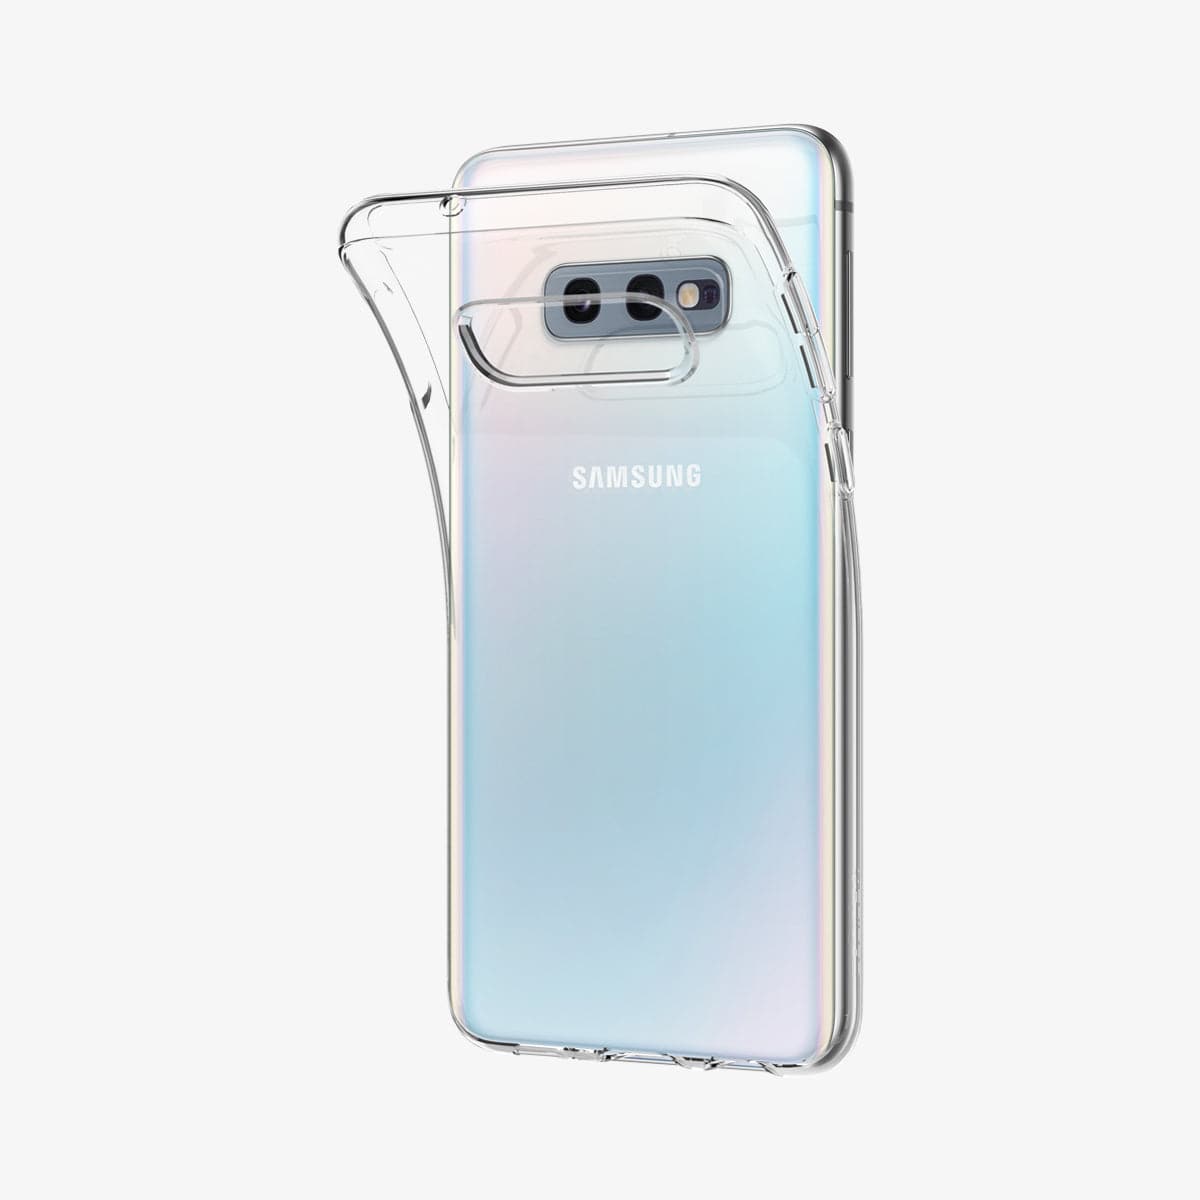 609CS25833 - Galaxy S10e Liquid Crystal Case in crystal clear showing the back with case bending away from the device